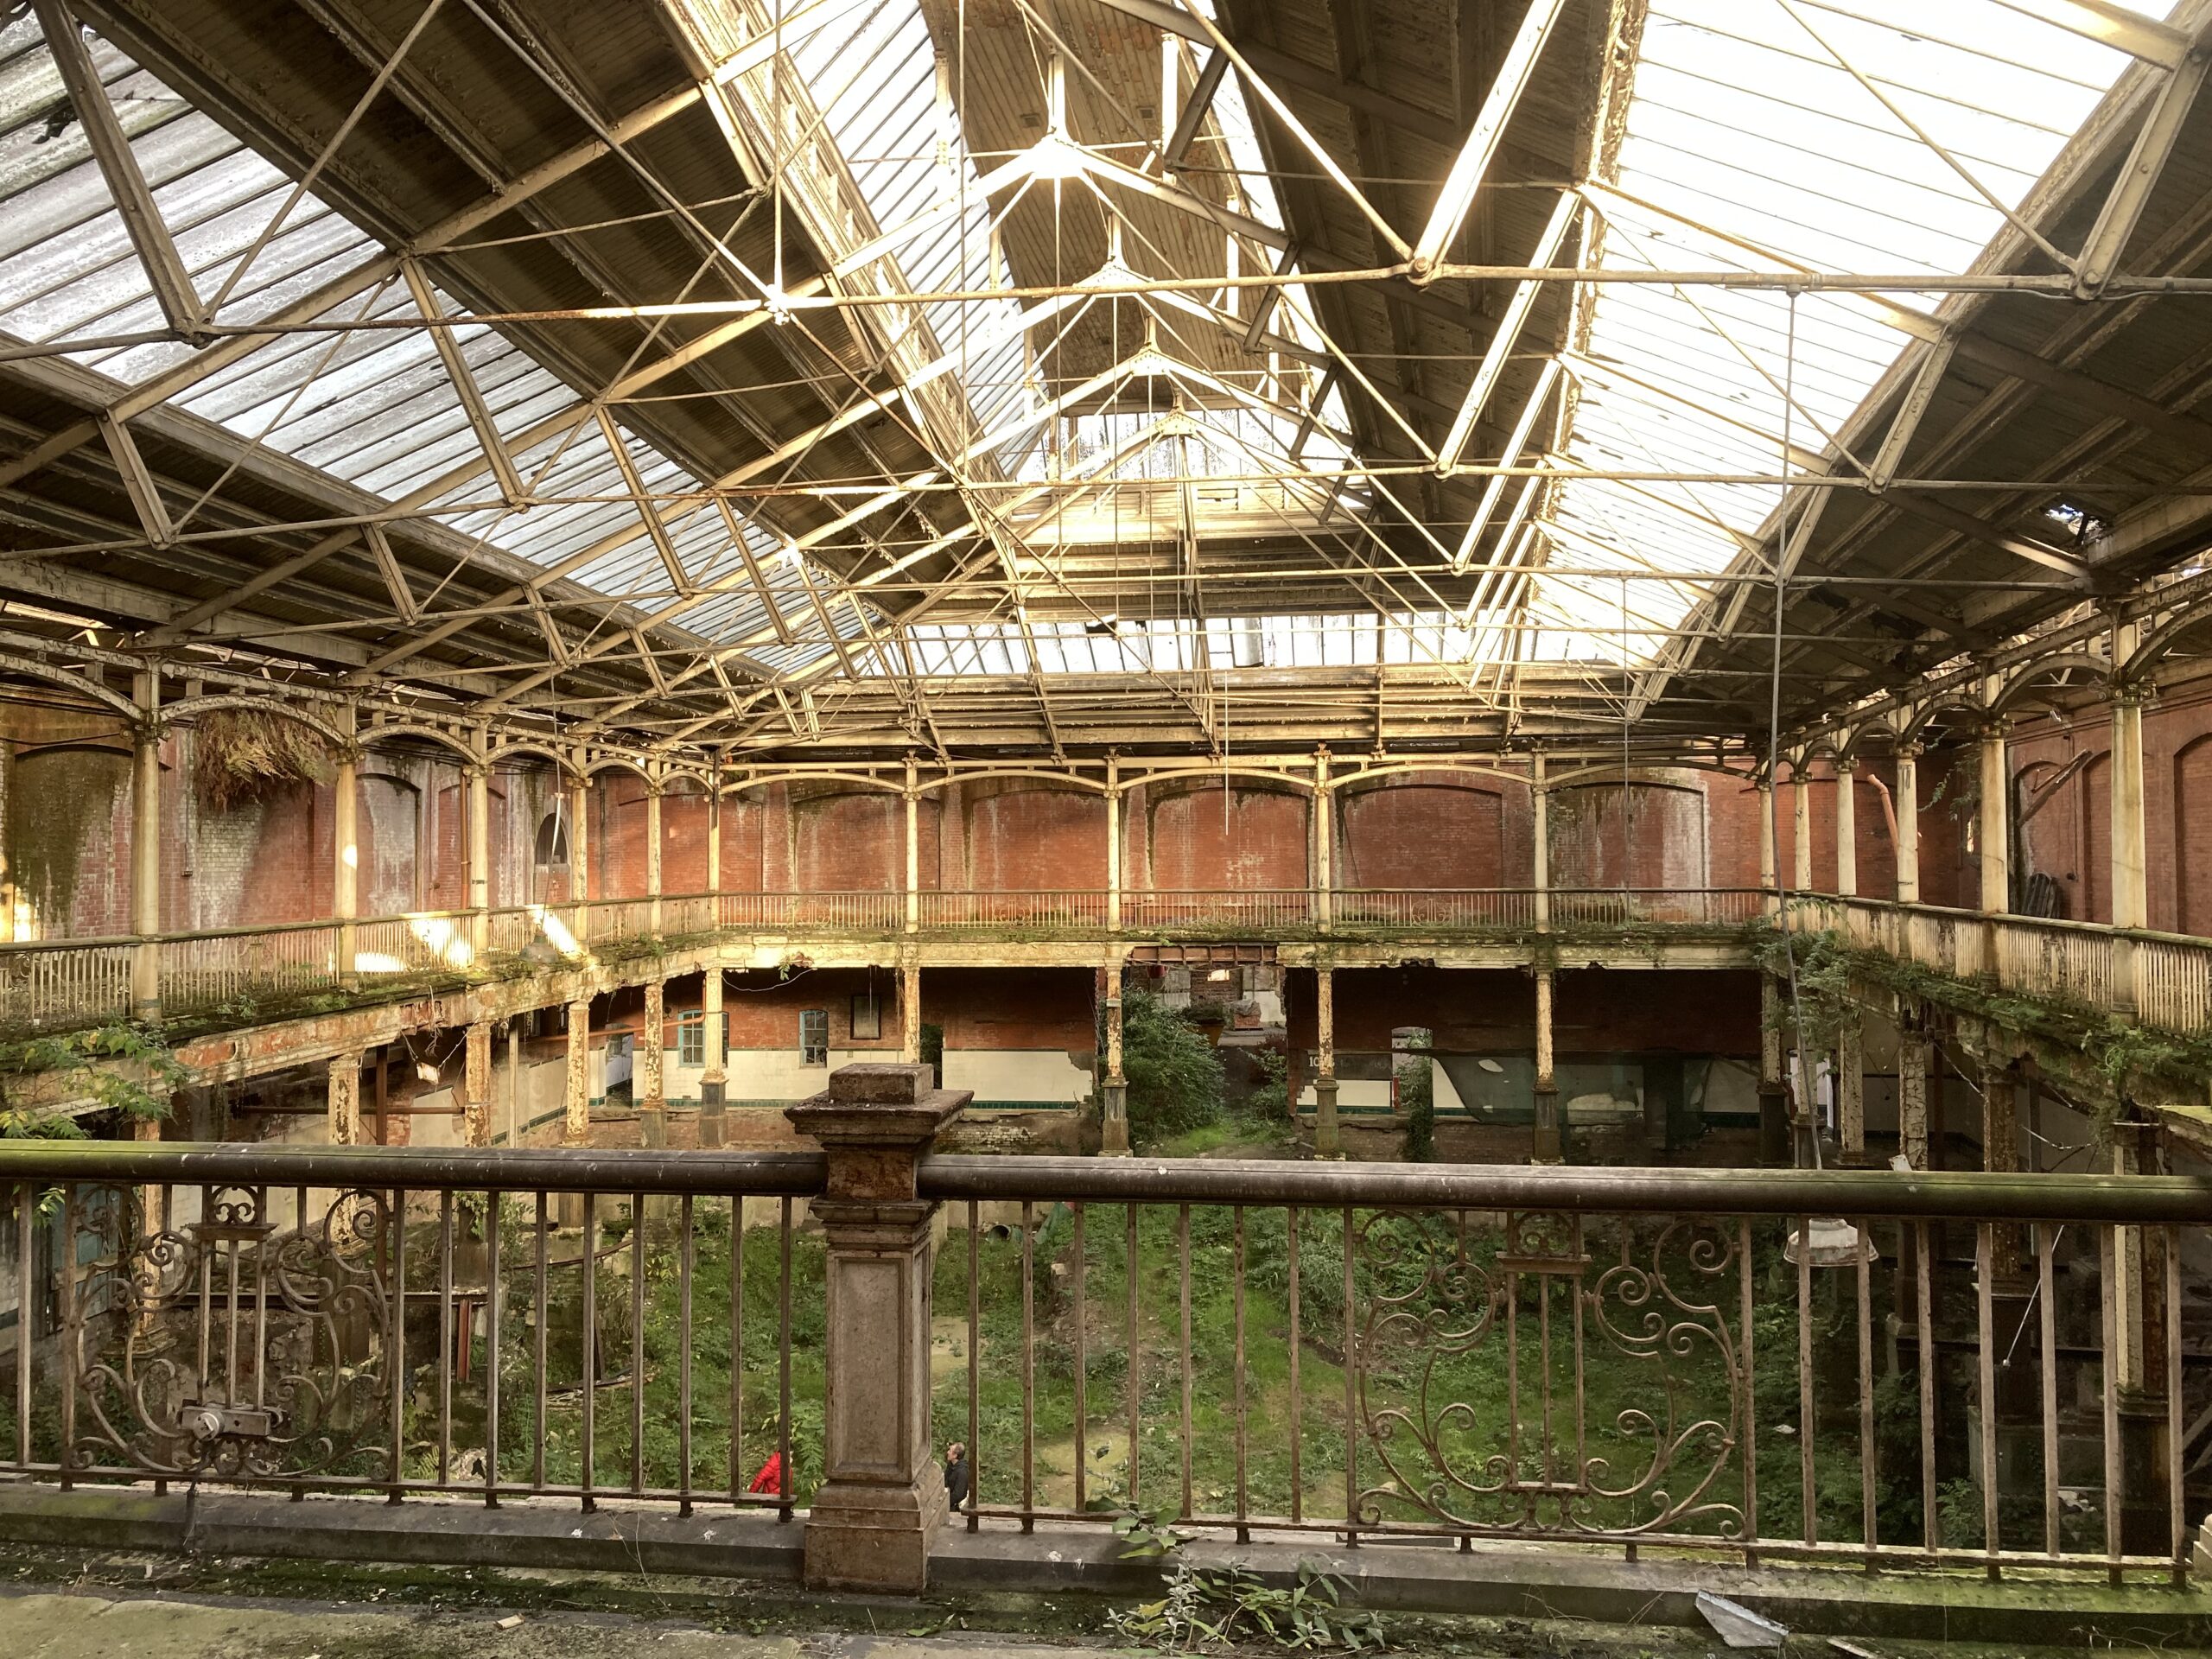 Interior of derelict market with green foliage taking over the groung